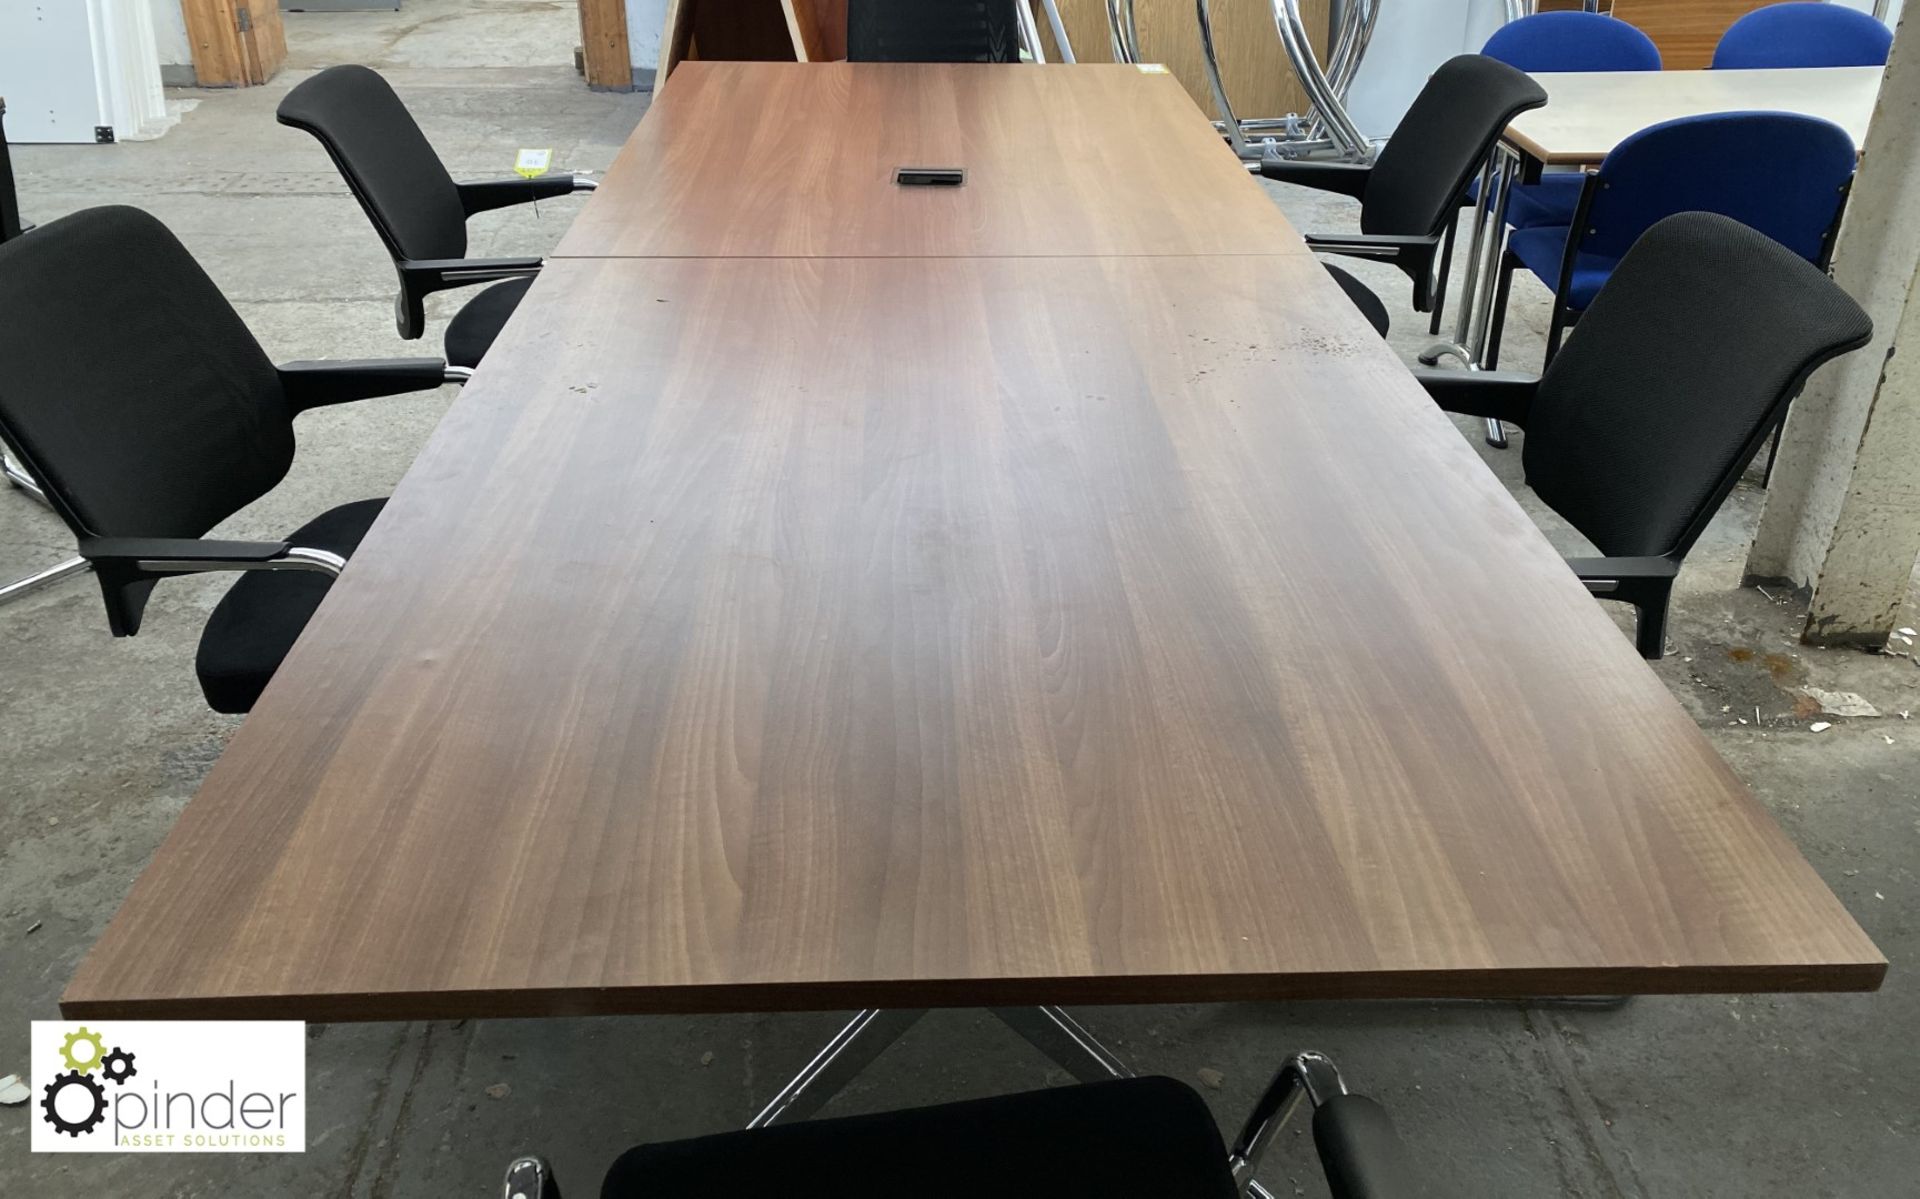 Walnut effect 2-section Meeting Table, 3000mm x 1195mm - Image 3 of 3